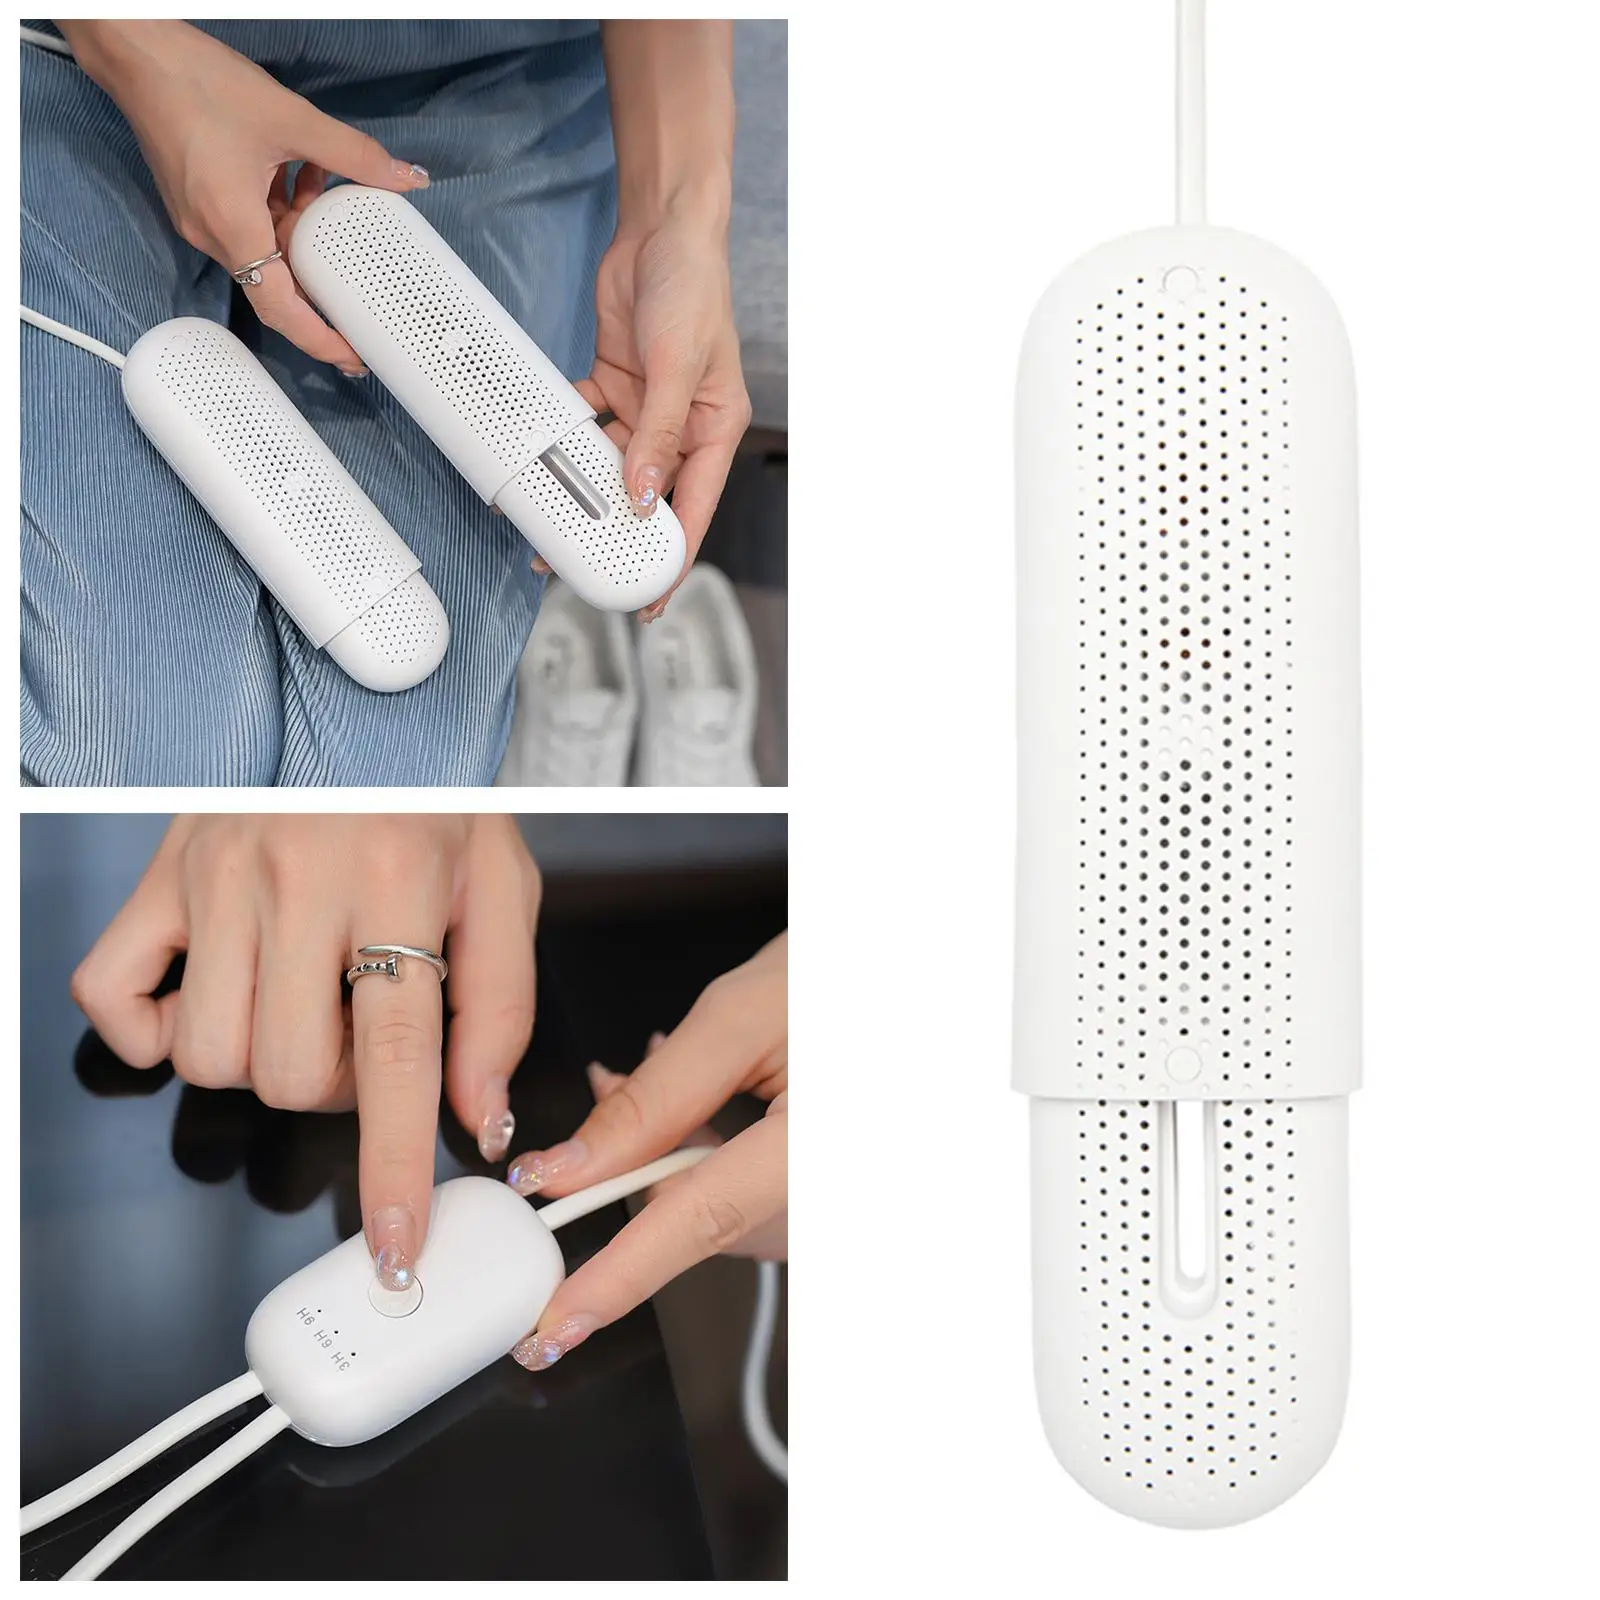 Portable Shoe Dryer Drying Sanitize Shoes Warmer Boot Dryer for Household